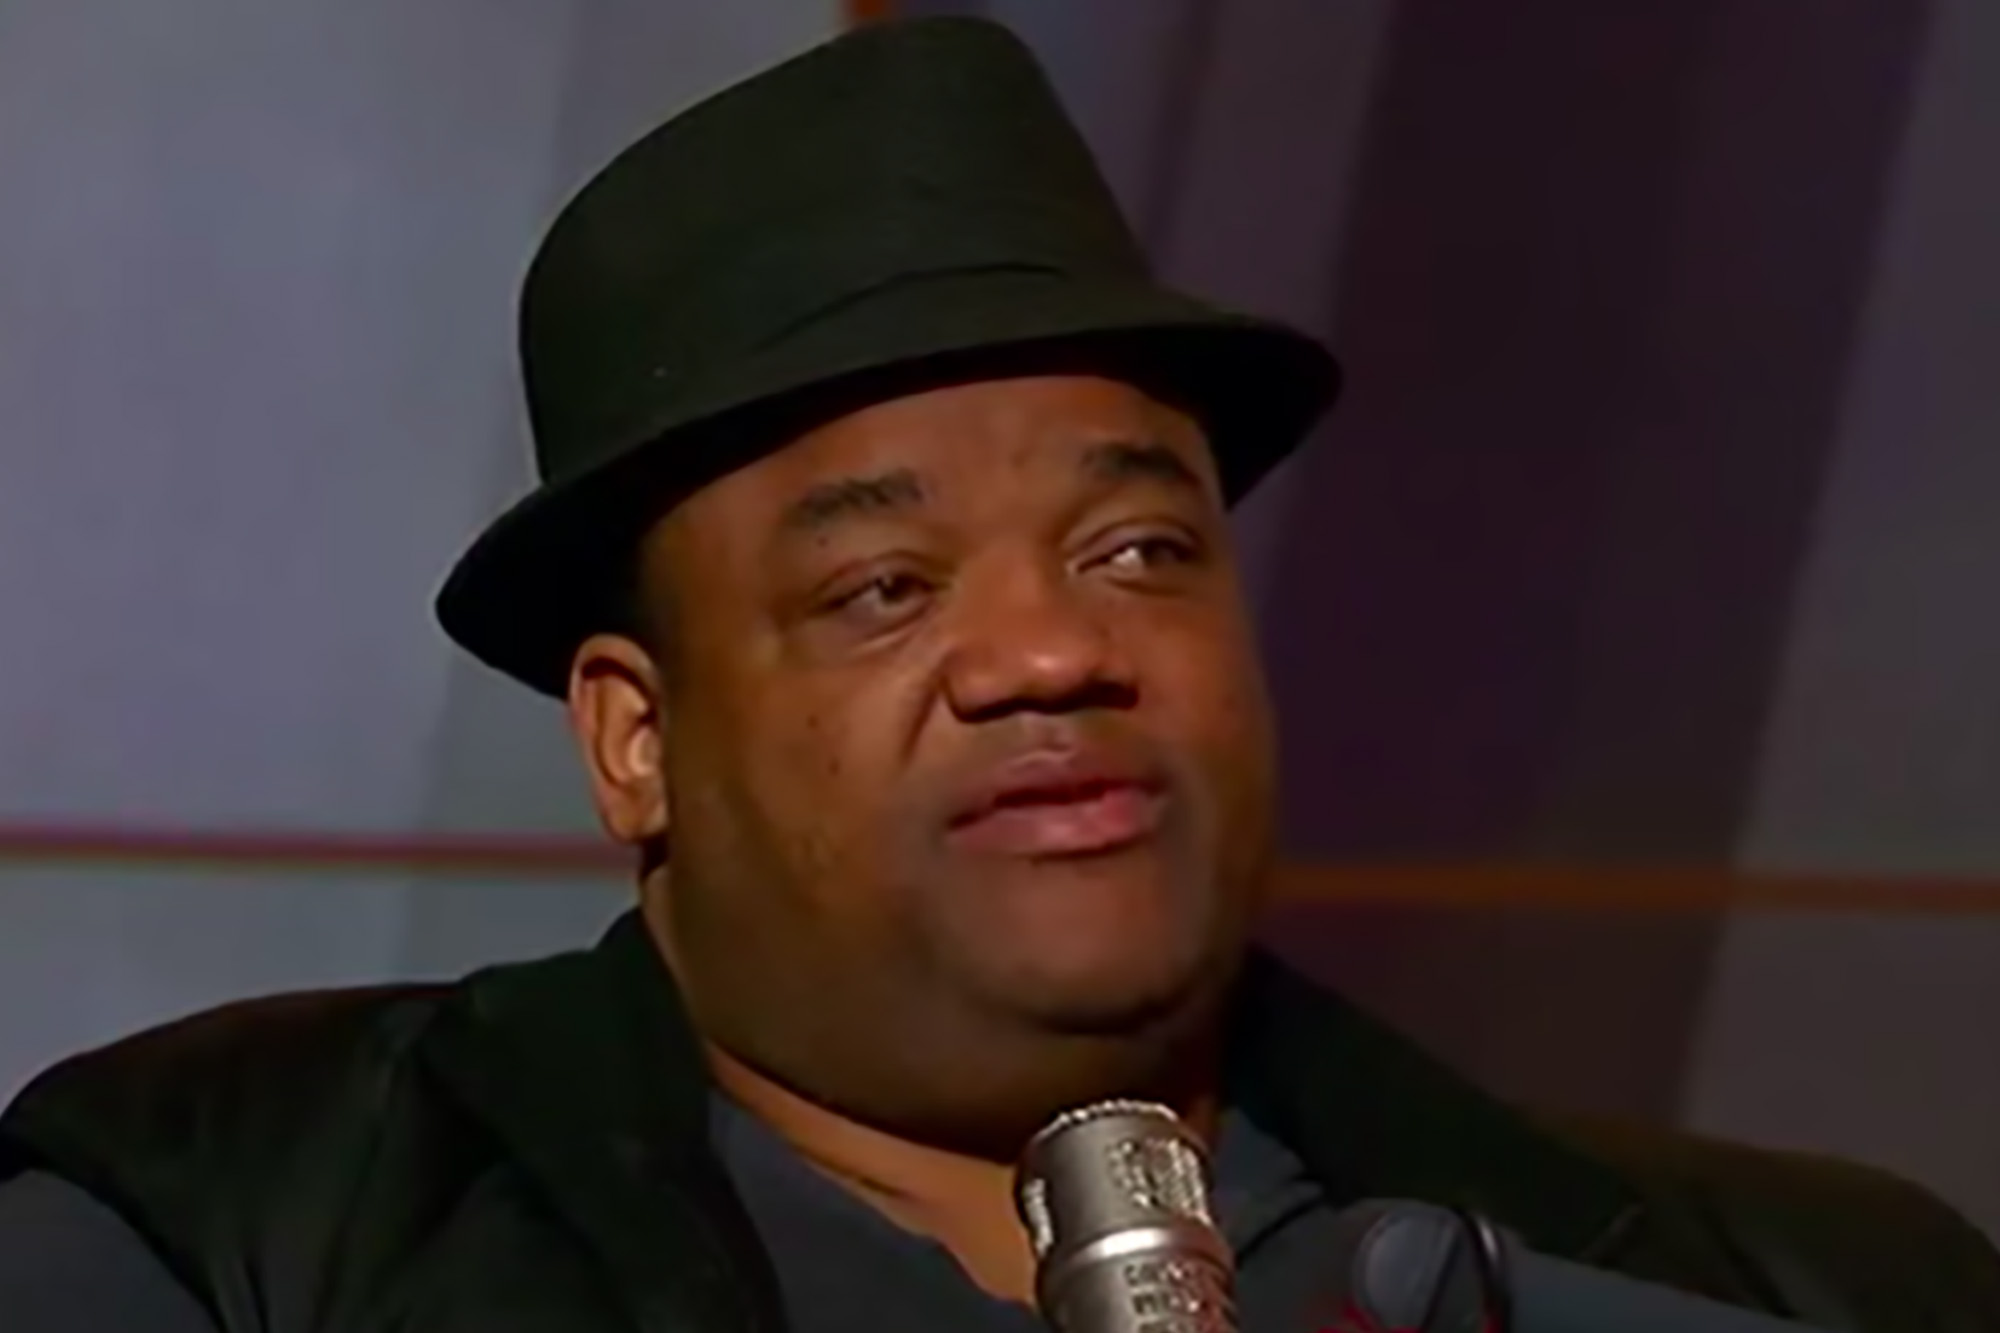 Jason Whitlock has big plans after leaving Fox Sports